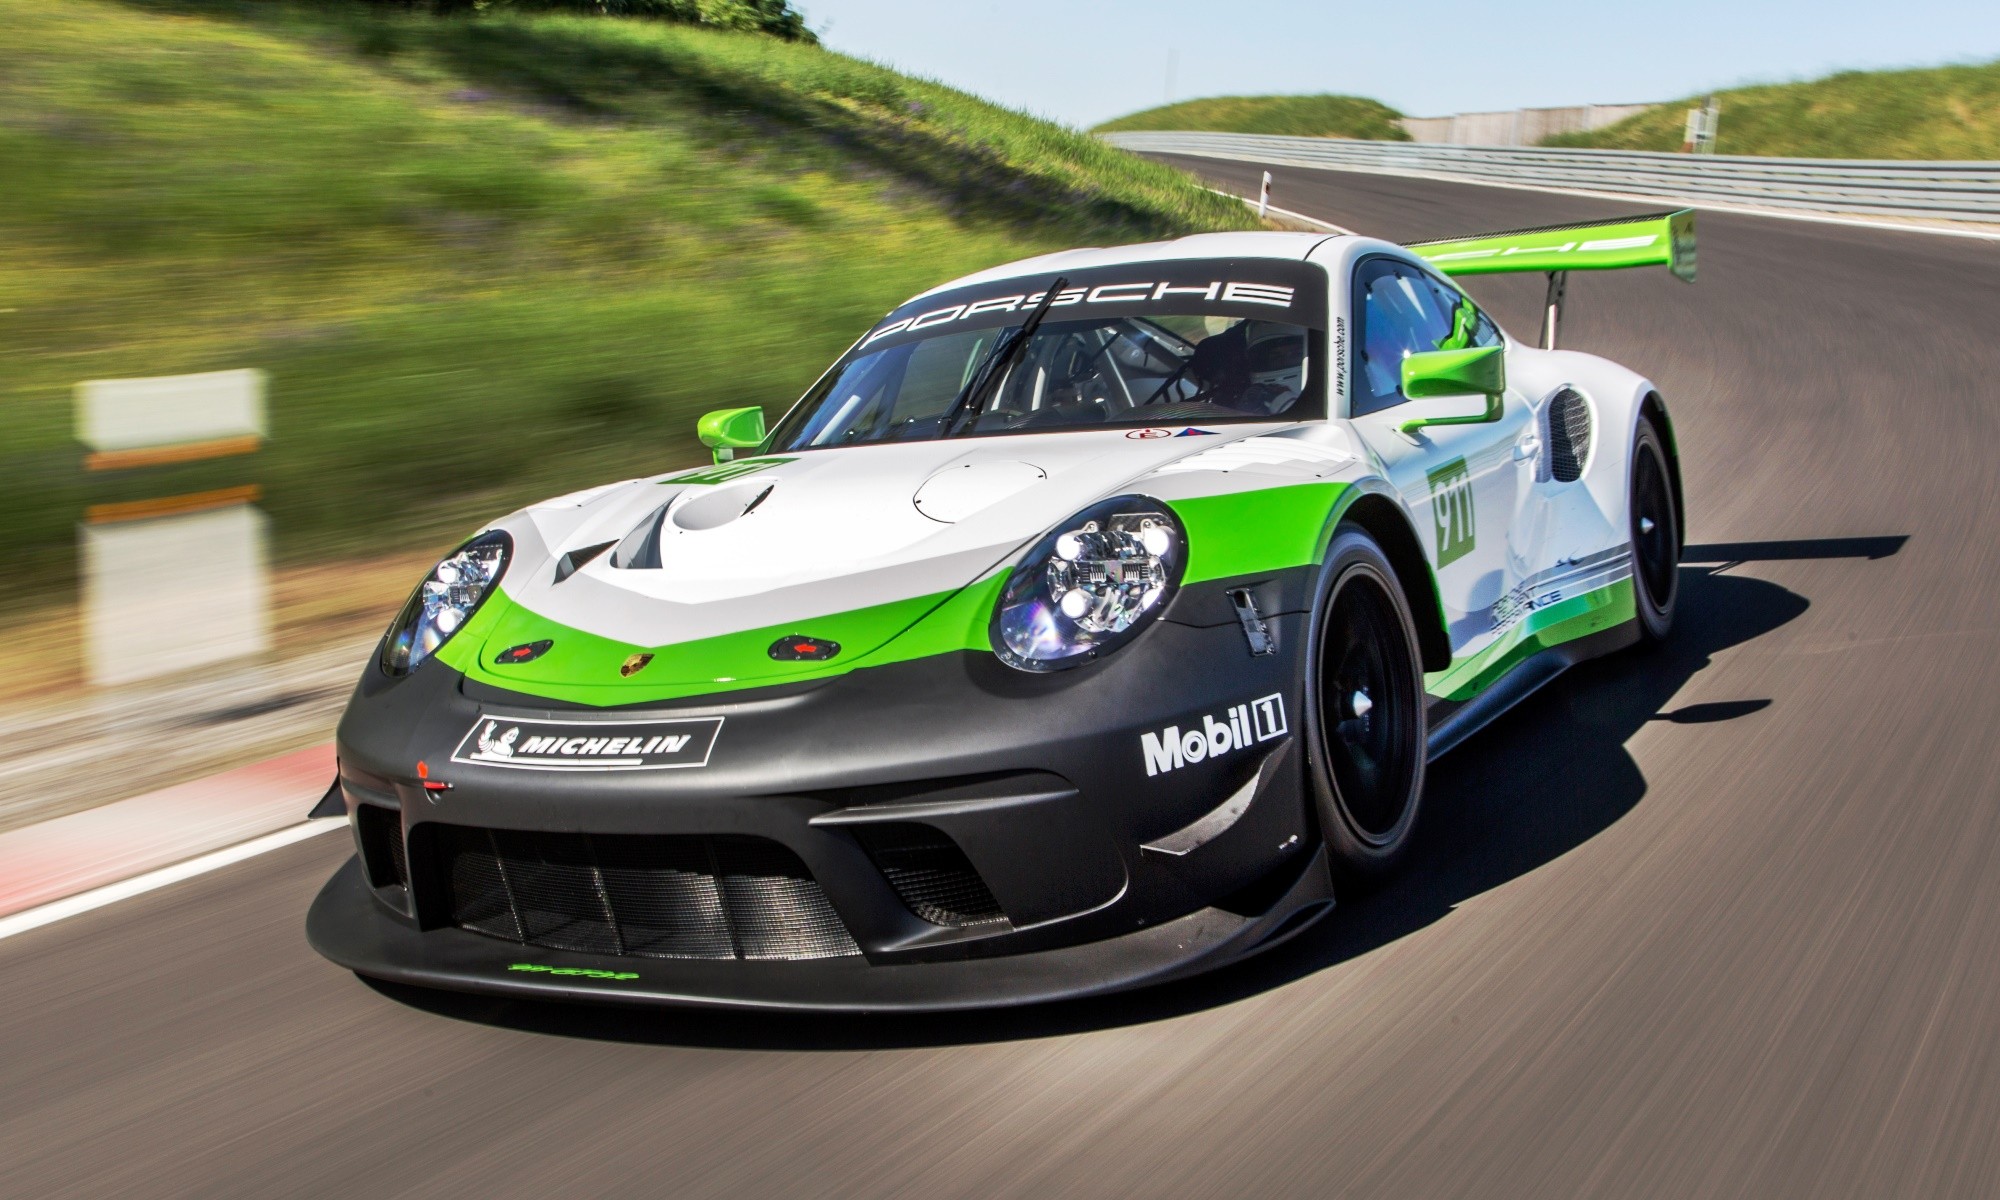 A new racer enters the world of motorsport, the Porsche